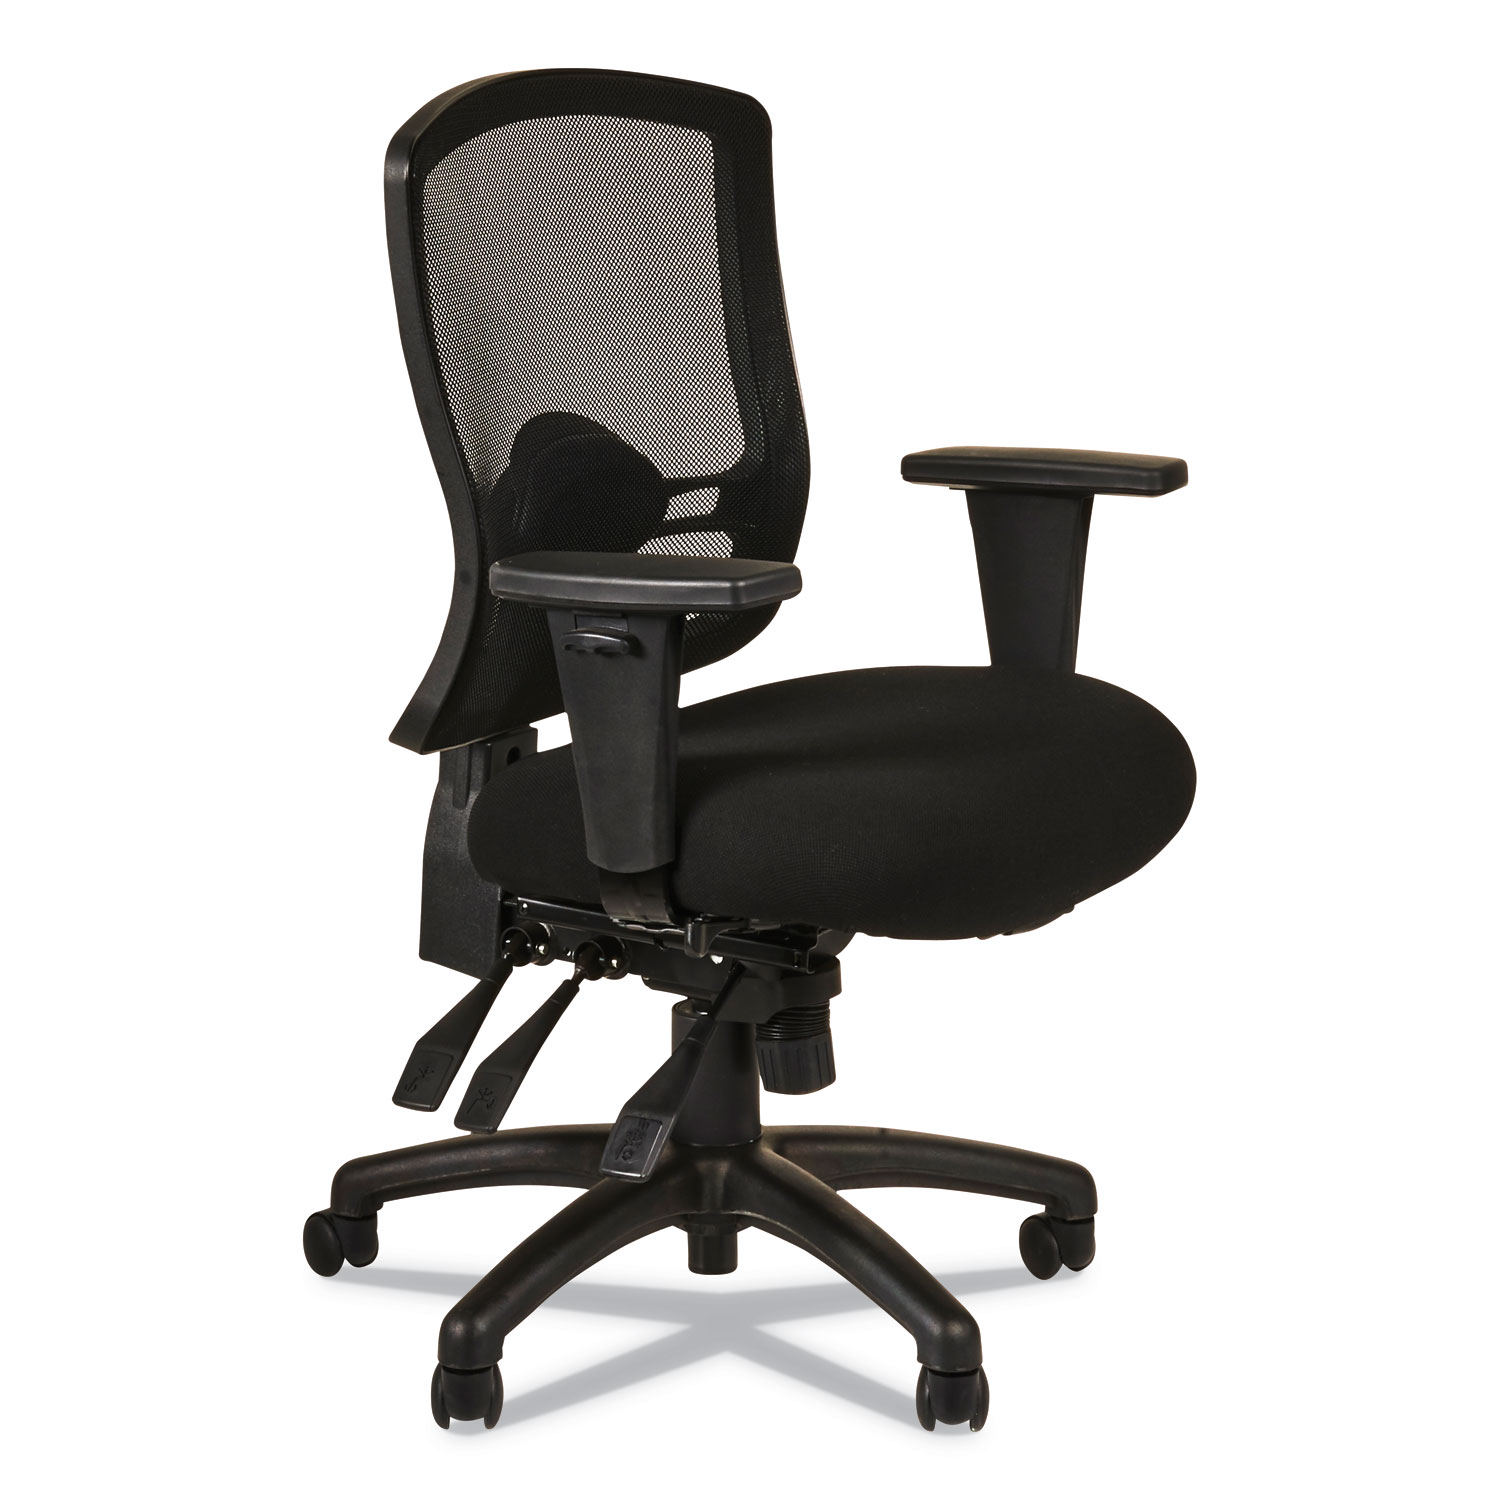  Alera ALEET4217 Alera Etros Series Mid-Back Multifunction with Seat Slide Chair, Supports up to 275 lbs., Black Seat/Black Back, Black Base (ALEET4217) 